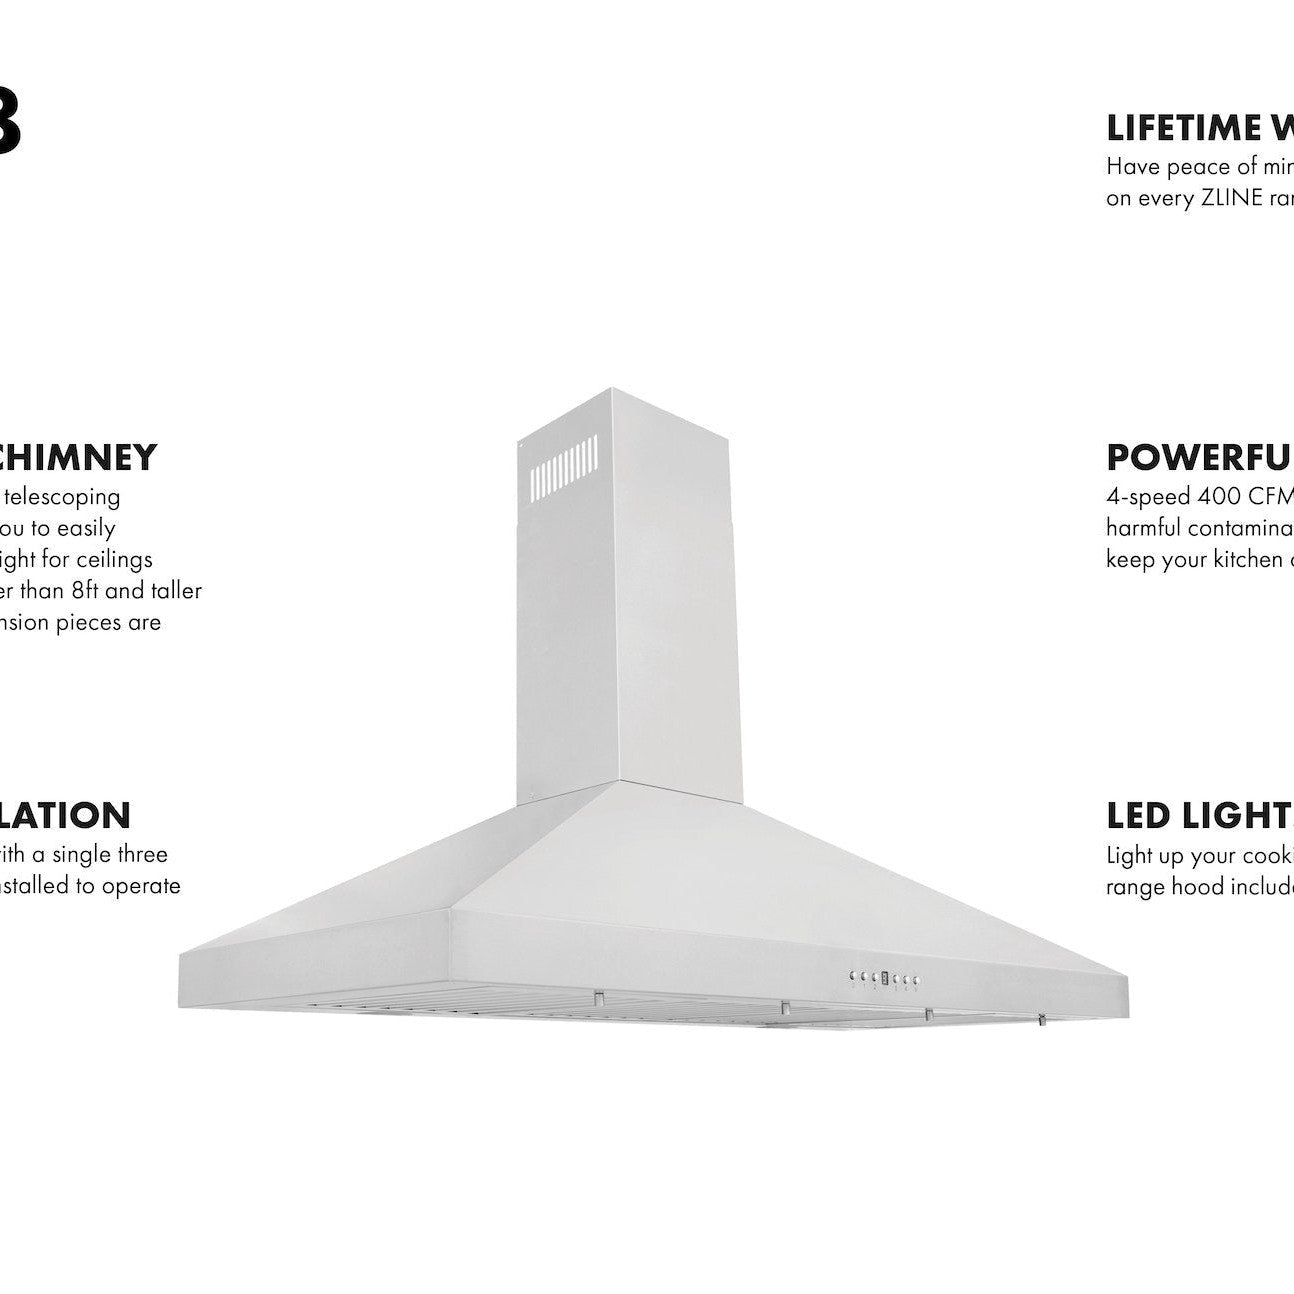 KL3-48 features lifetime warranty, LED lights, telescoping chimney, simple installation, and powerful motor.